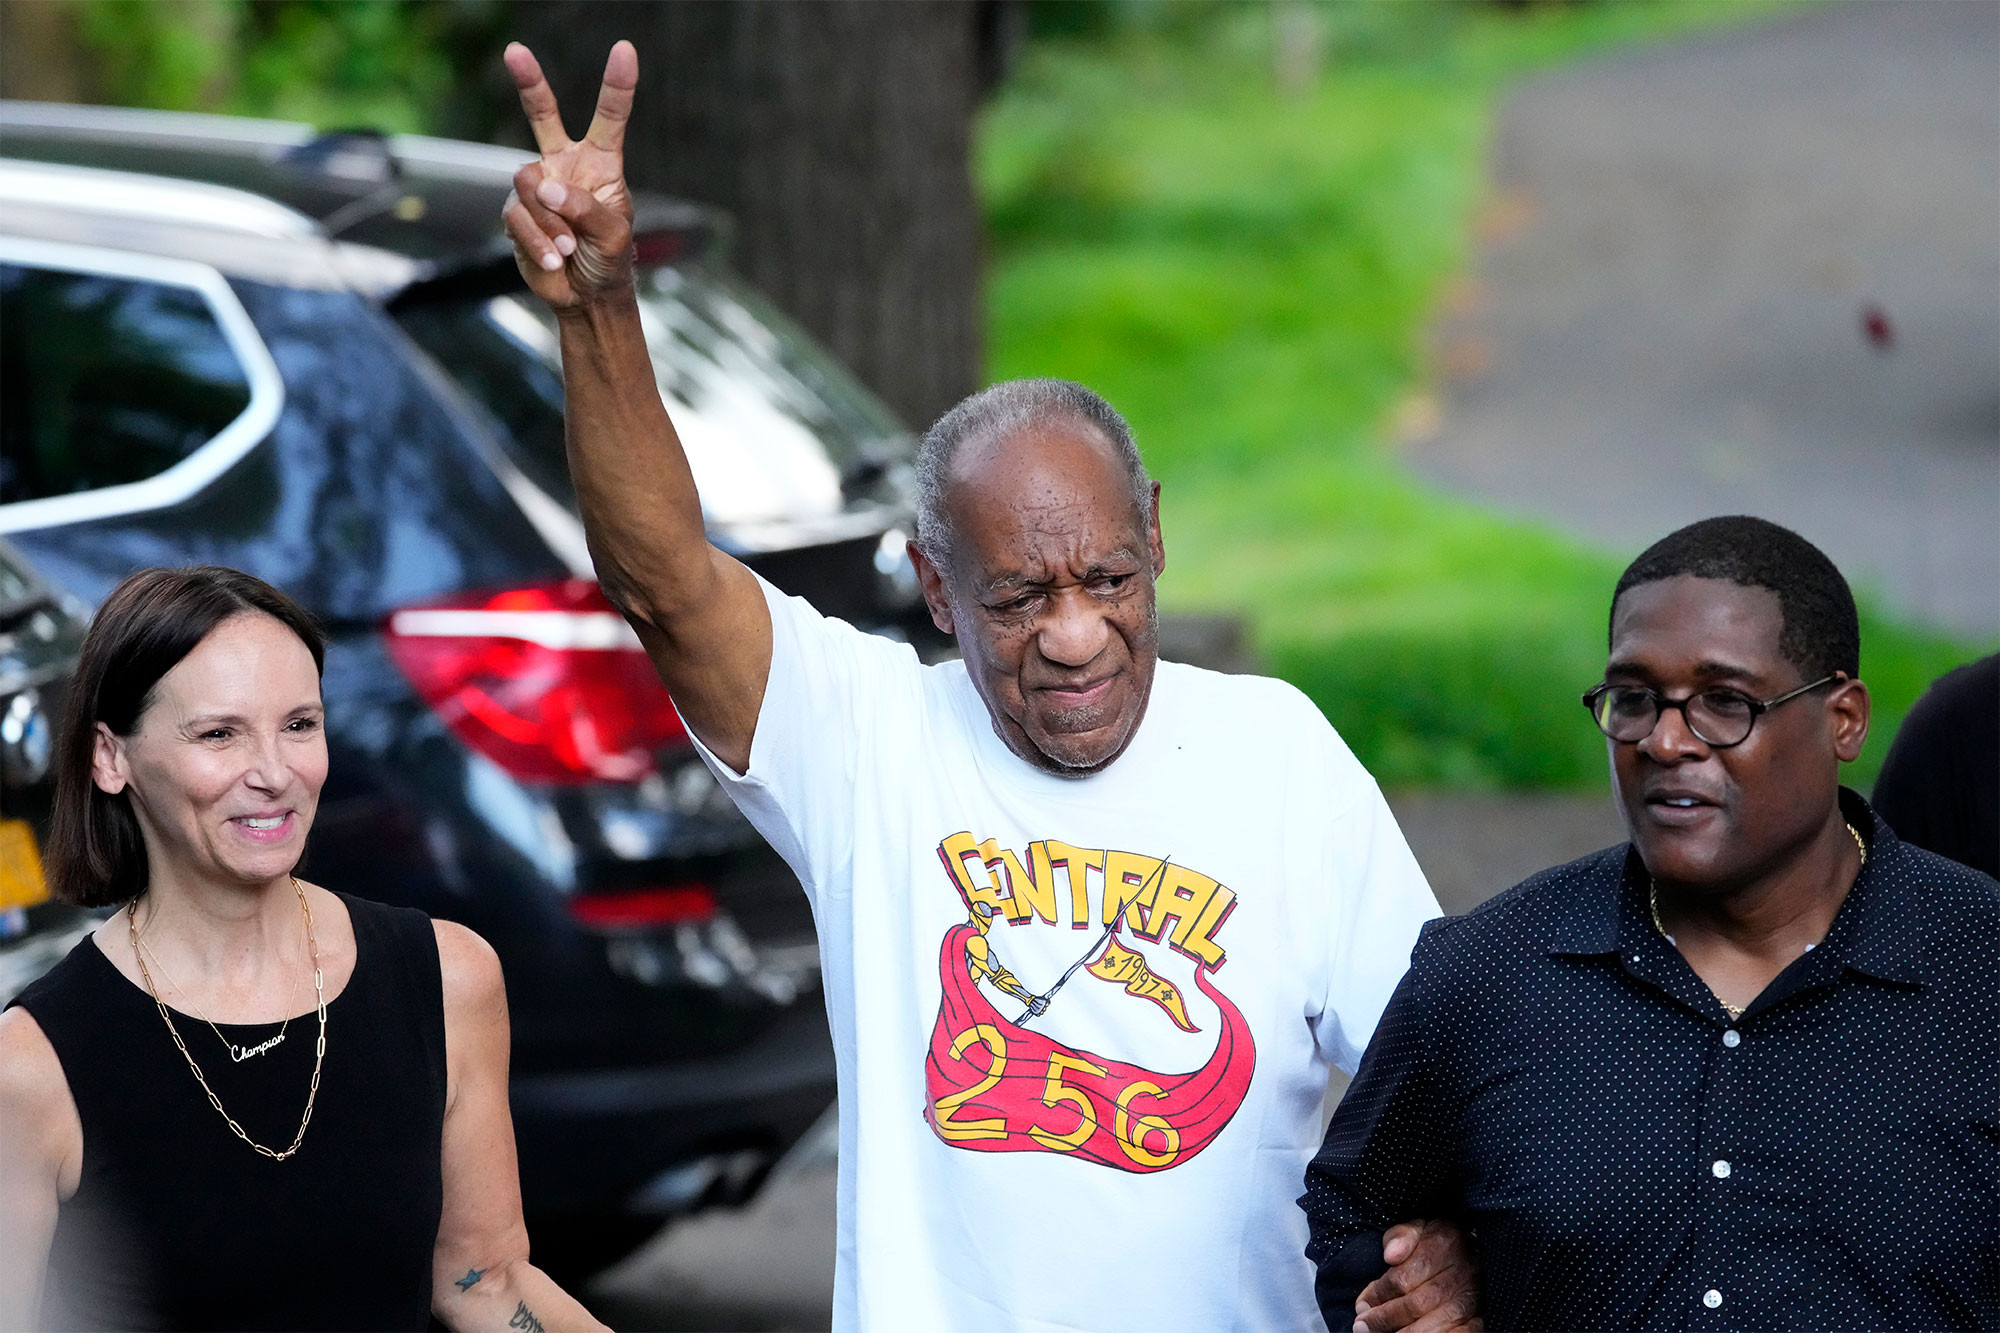 Bill Cosby out of jail says he’s innocent